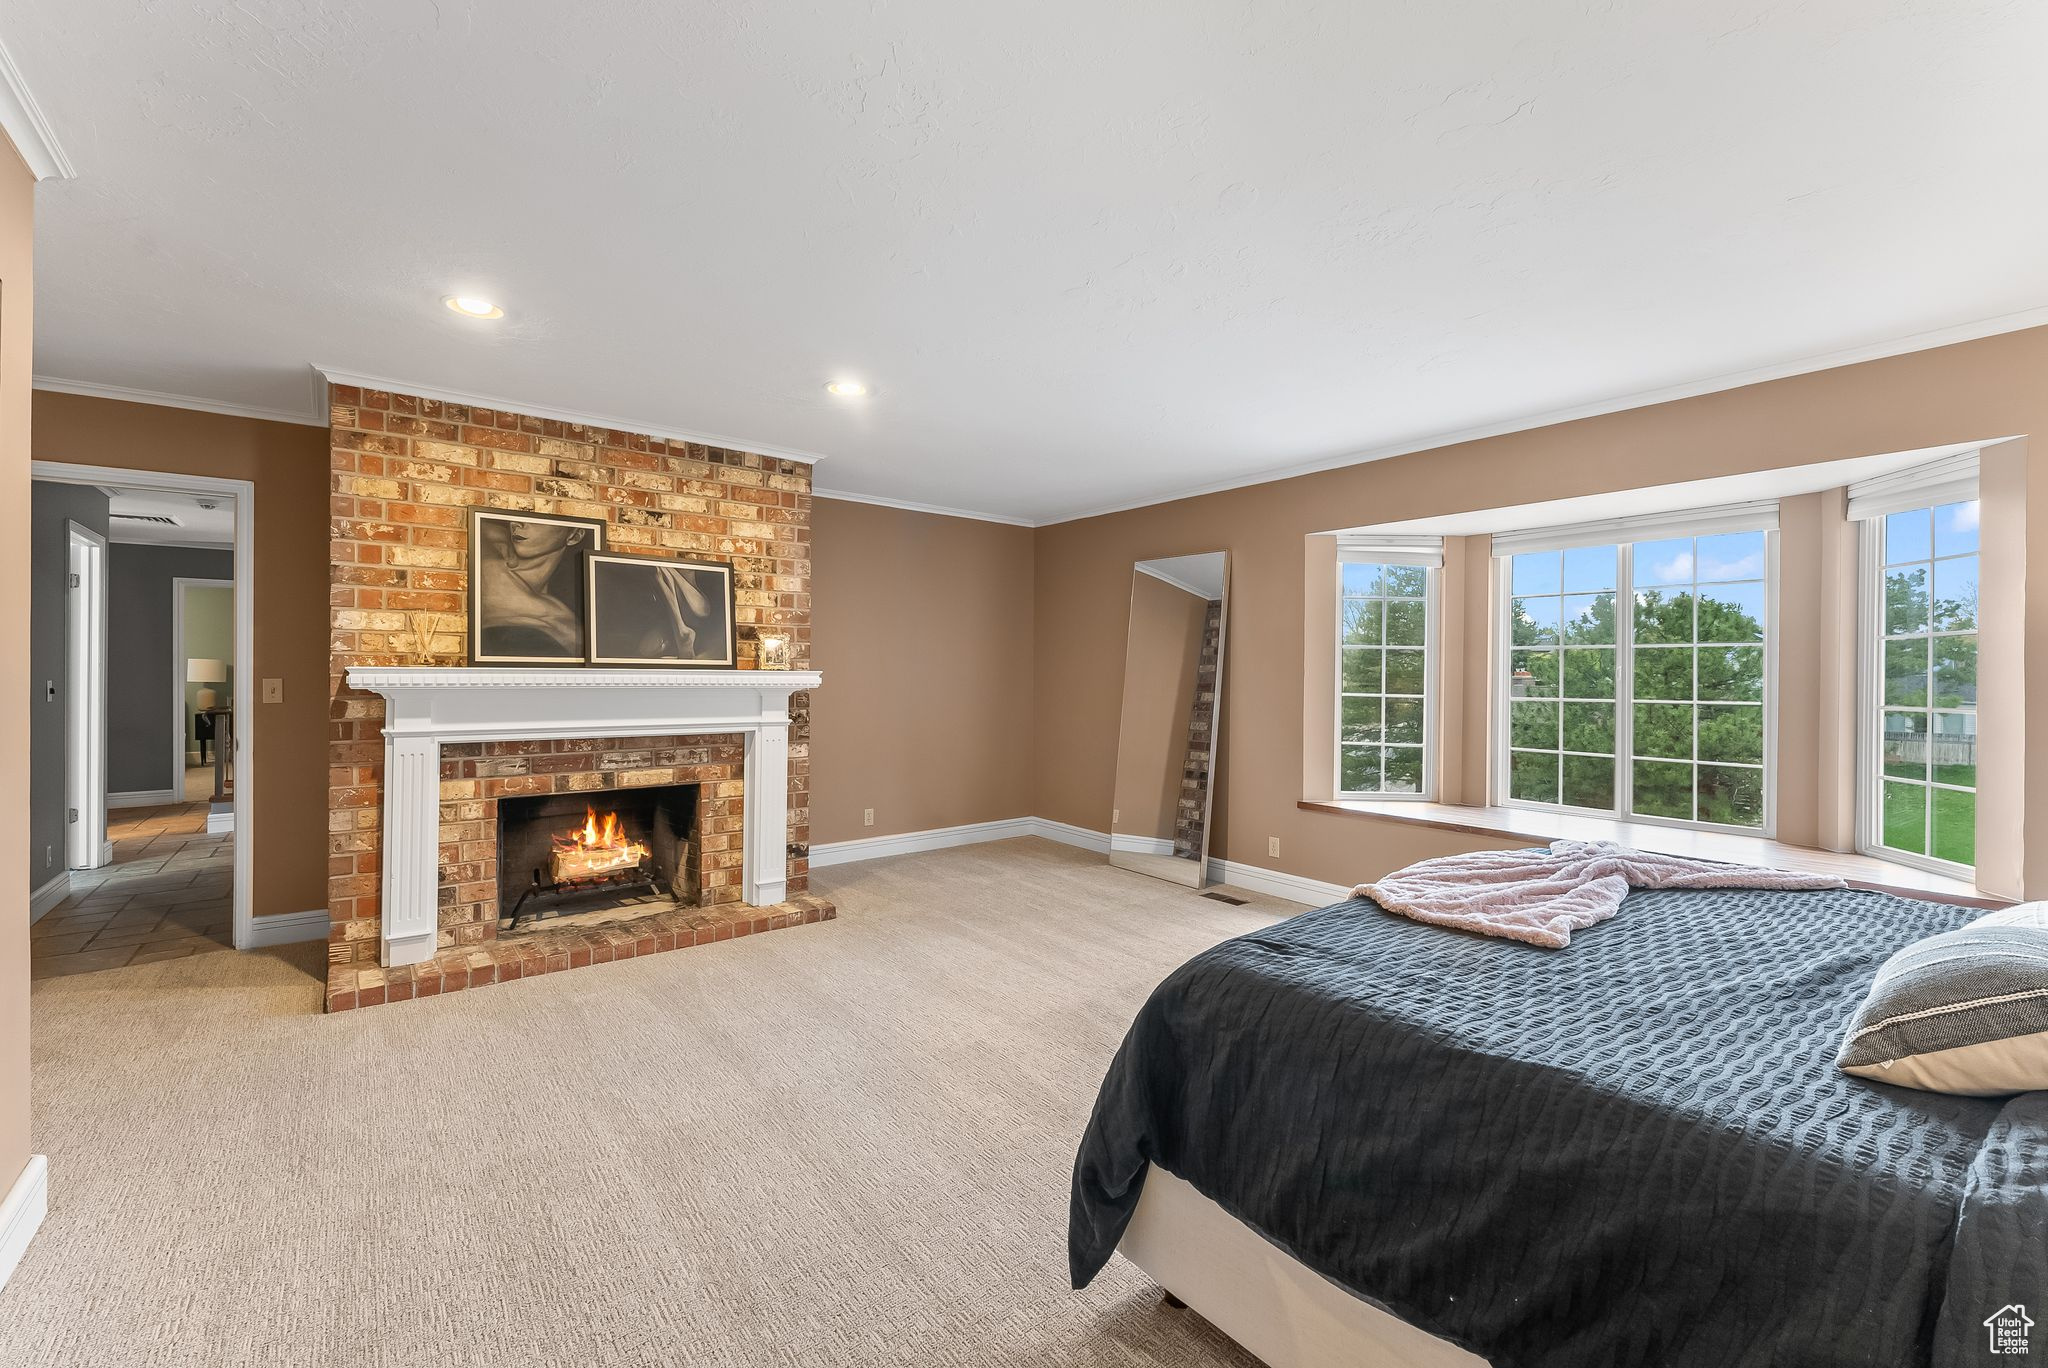 Carpeted bedroom with a brick fireplace and crown molding